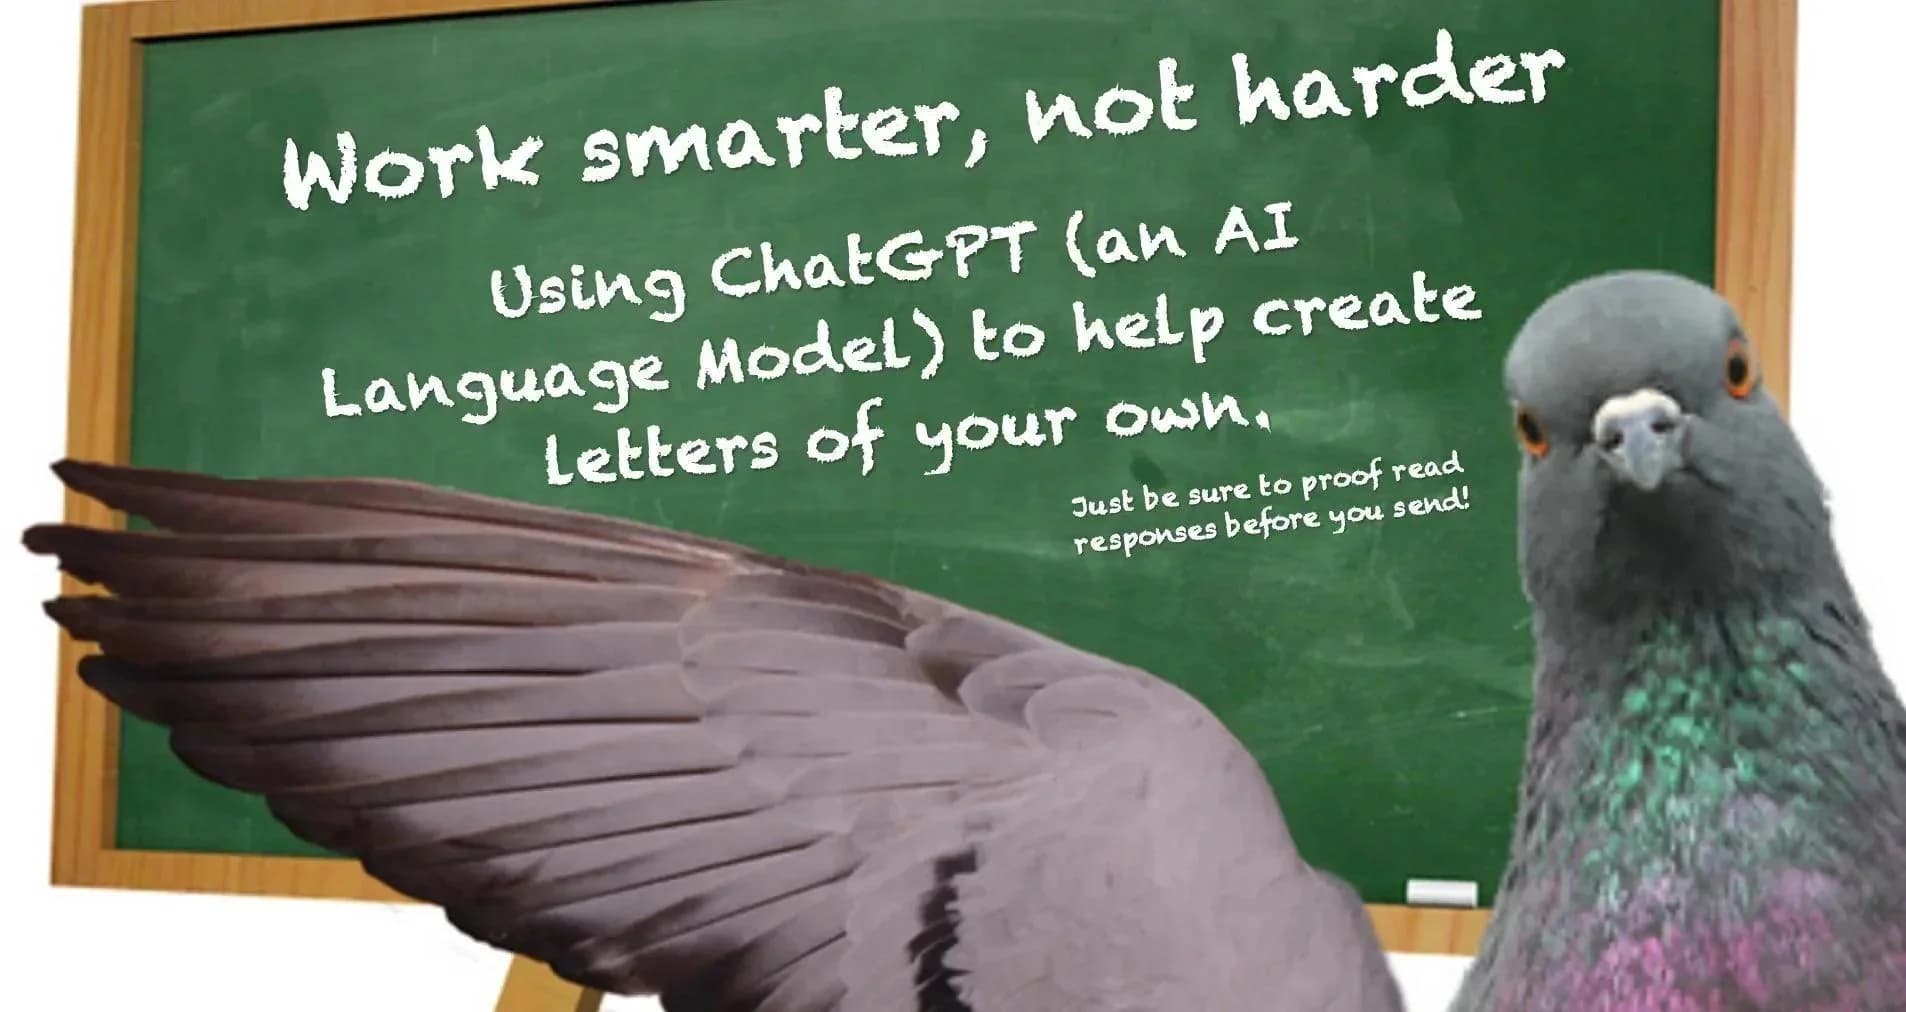 HEADER: WORK SMARTER, NOT HARDER - USING CHATGPT TO CREATE LETTERS OF YOUR OWN